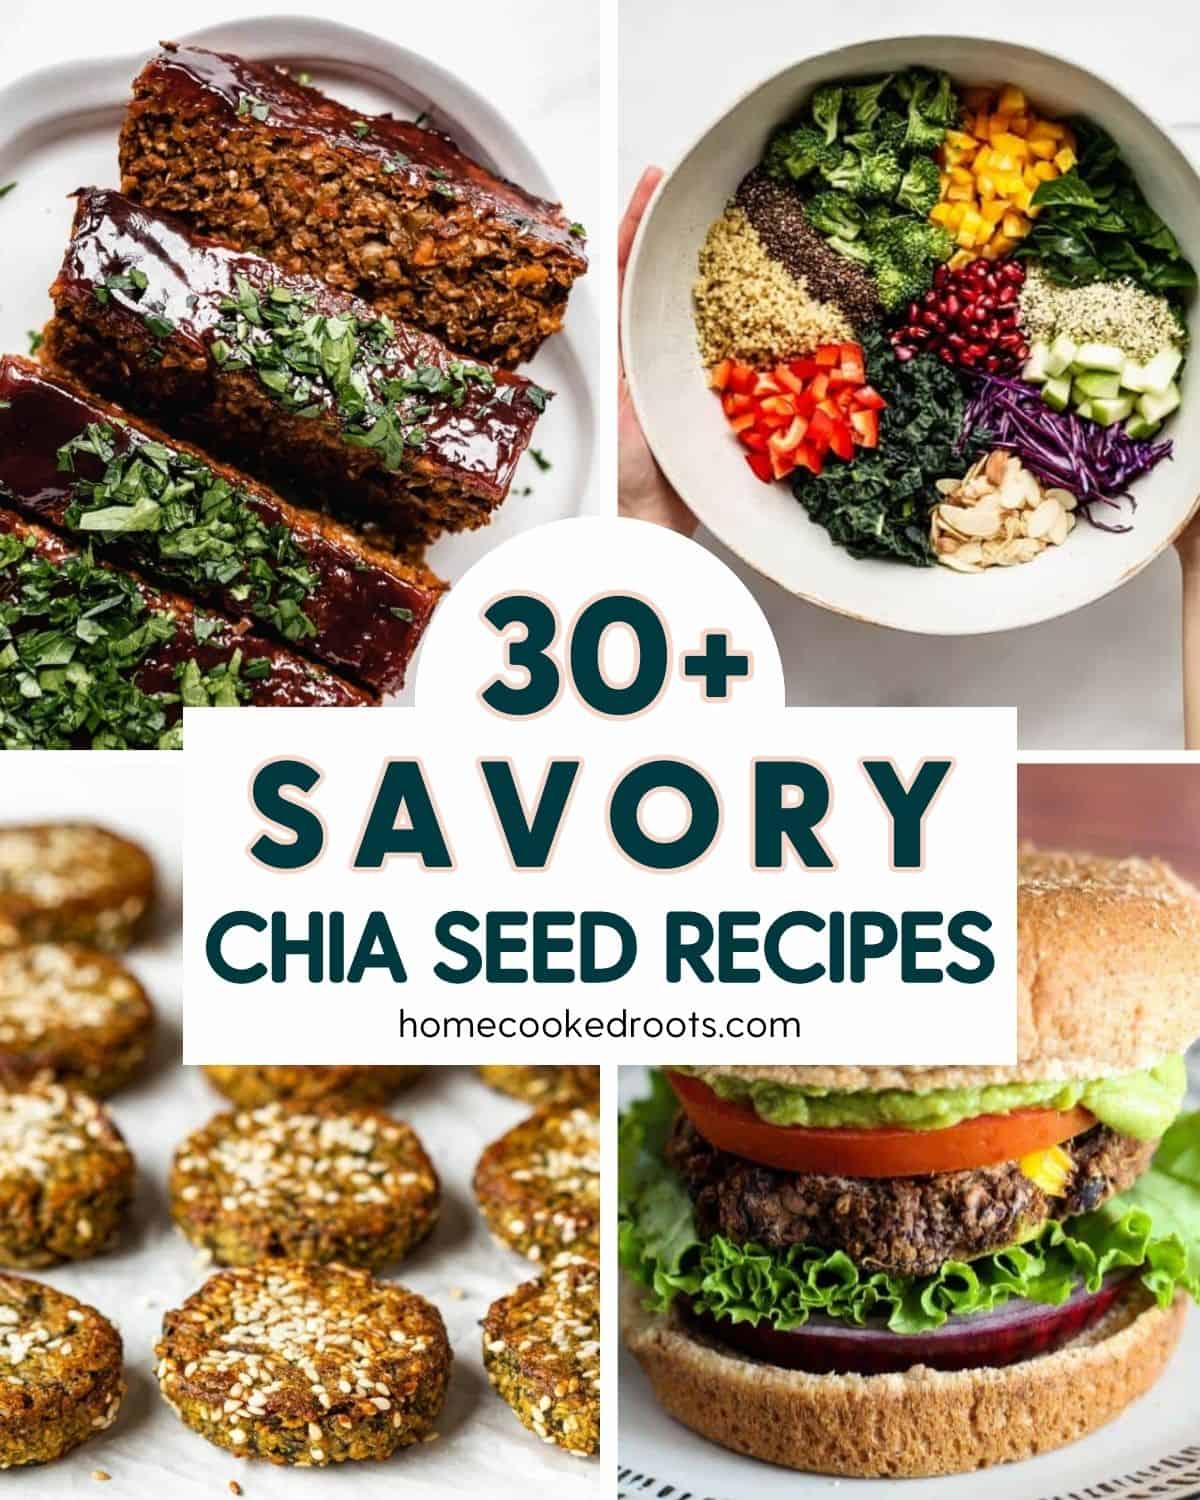 Collage of 4 images of recipes using chia seeds. Overlay text that says 30+ Savory Chia Seed Recipes, homecookedroots.com